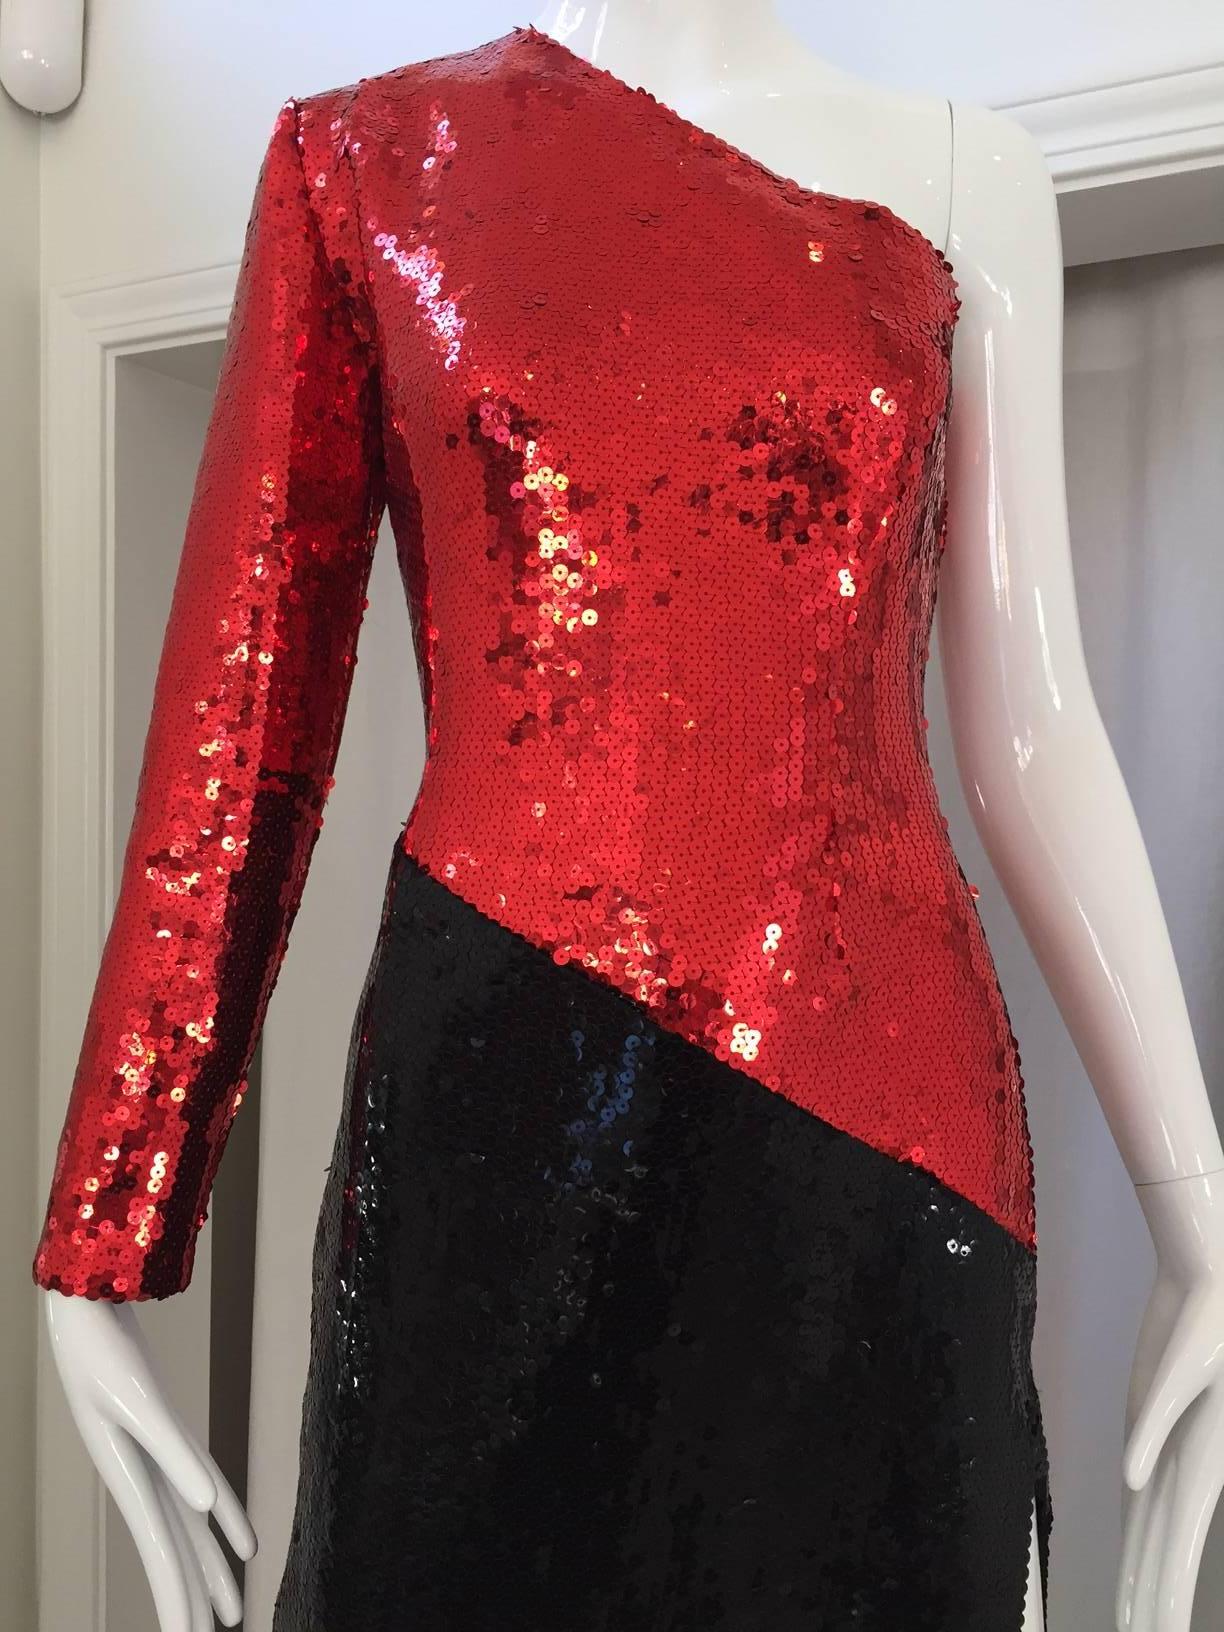 Vintage 1980s Bill Blass Red and Black One Shoulder Sequin Gown sequin one gown with slit on the side. Sexy and Fun Vintage cocktail dress.
B: 32-34